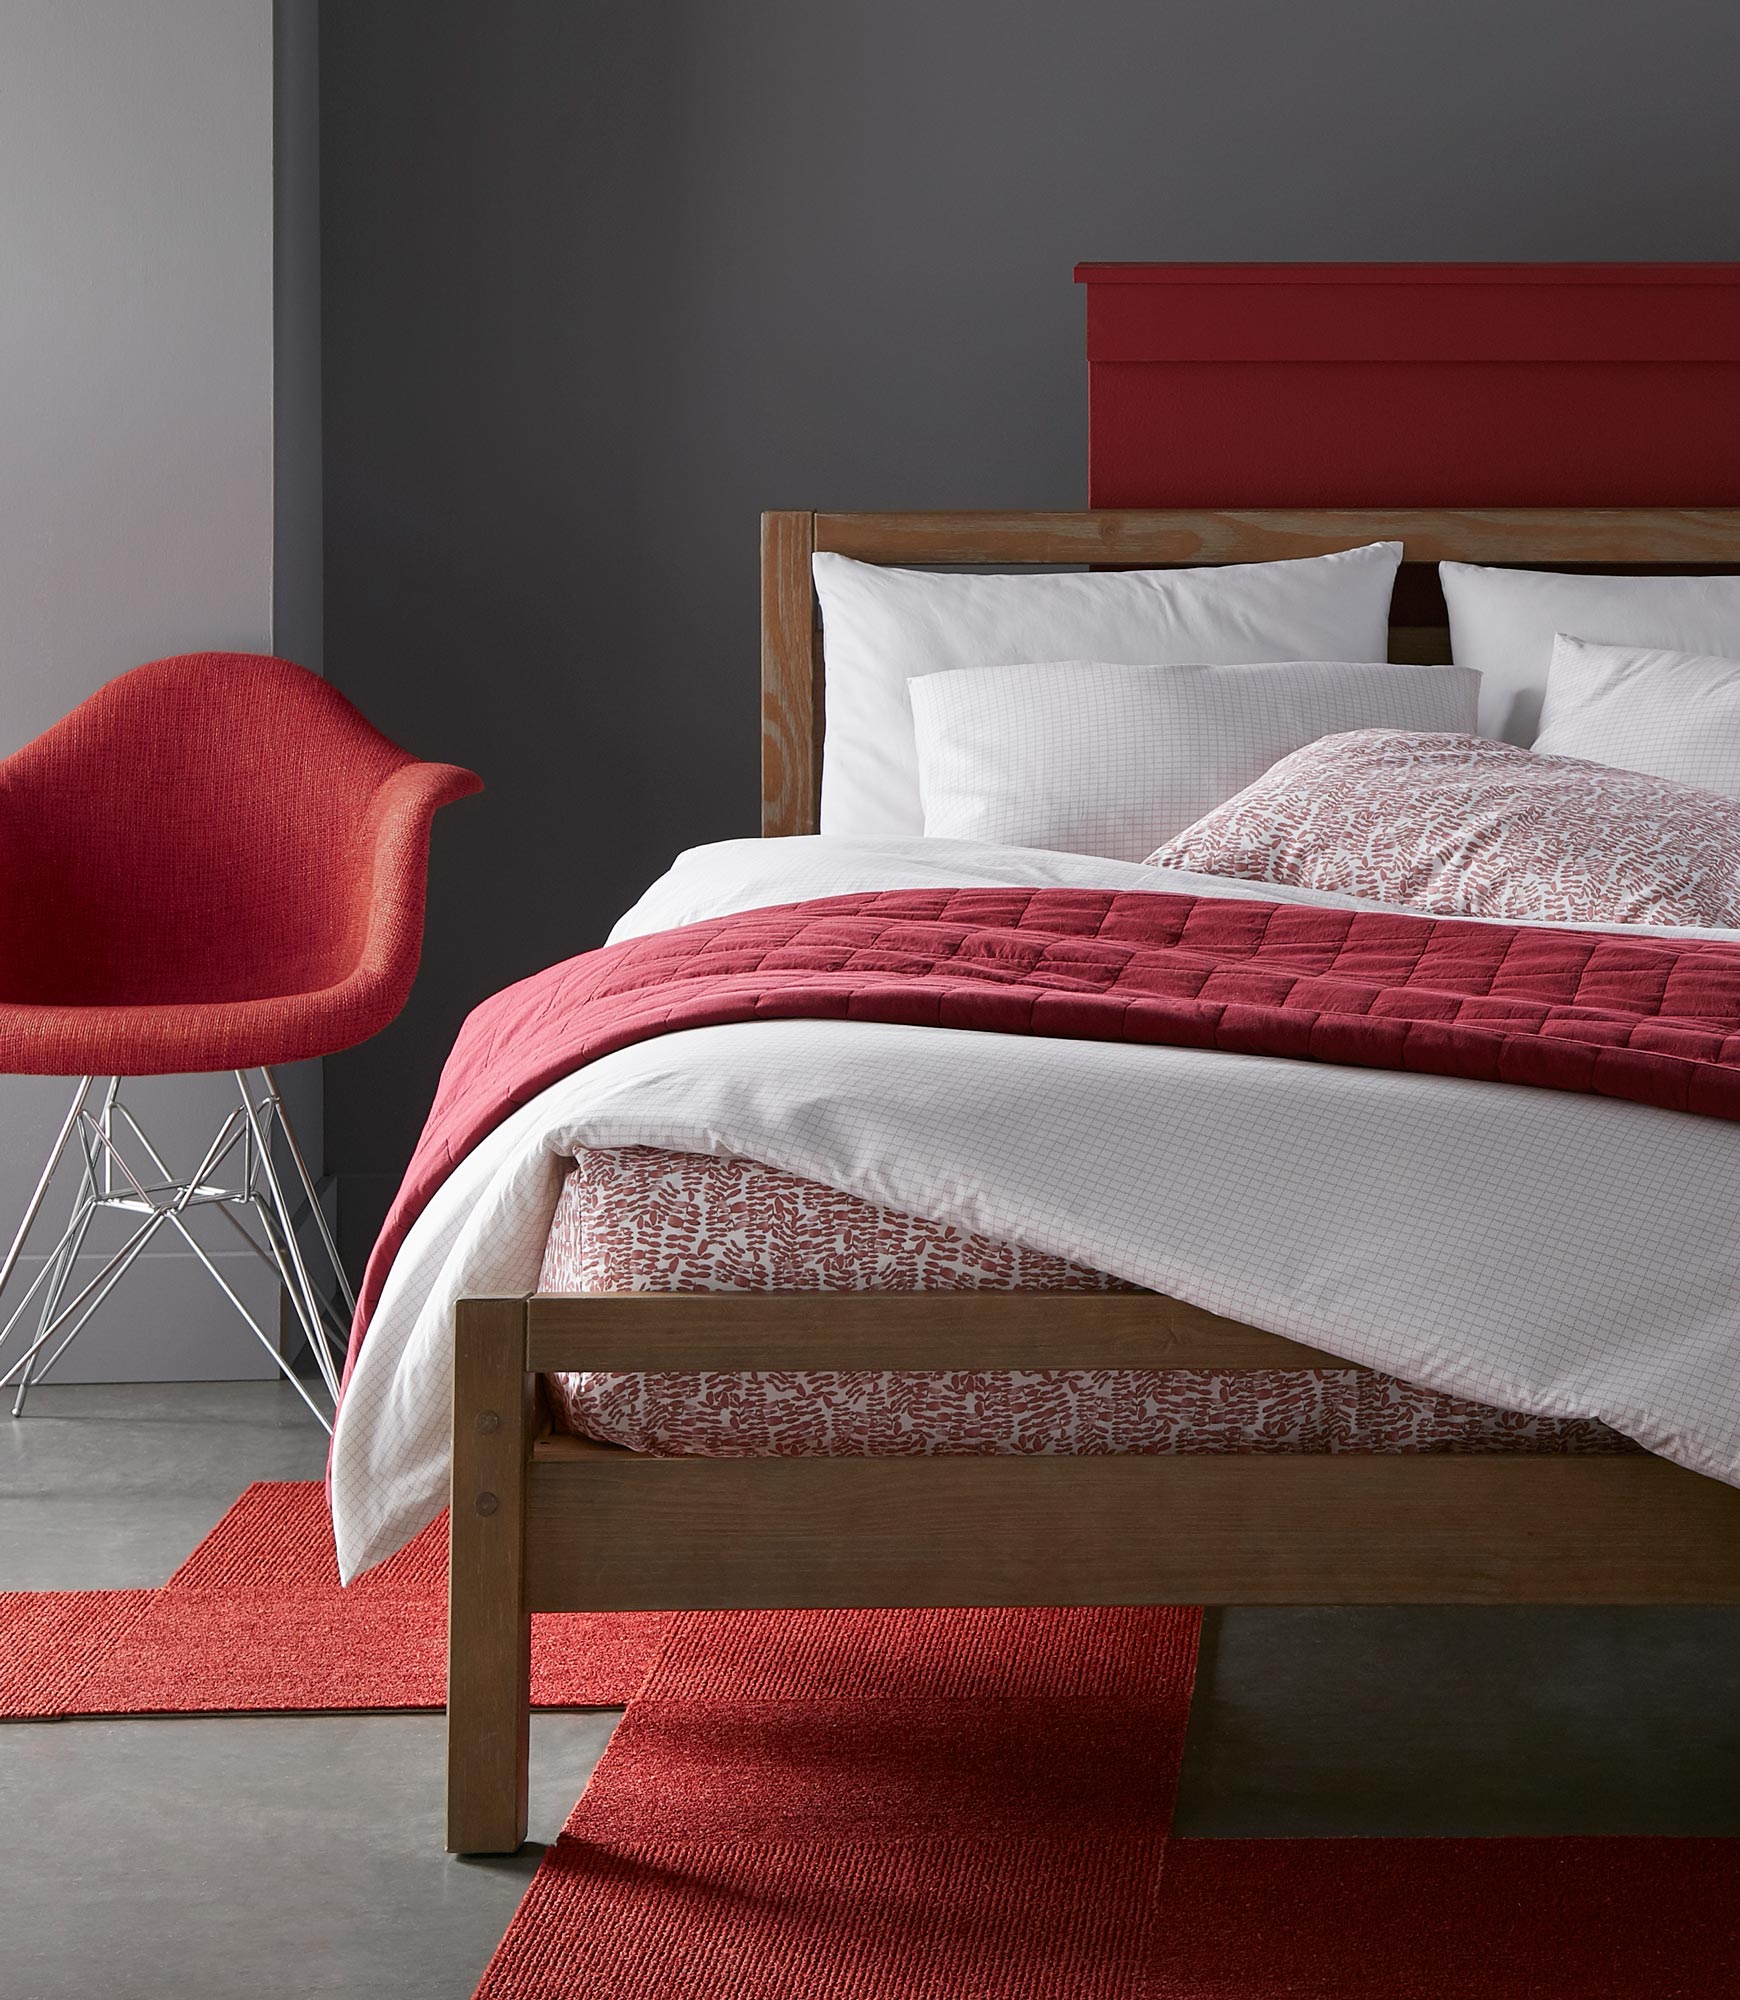 Grid Berry Duvet Cover and Shams on Bed